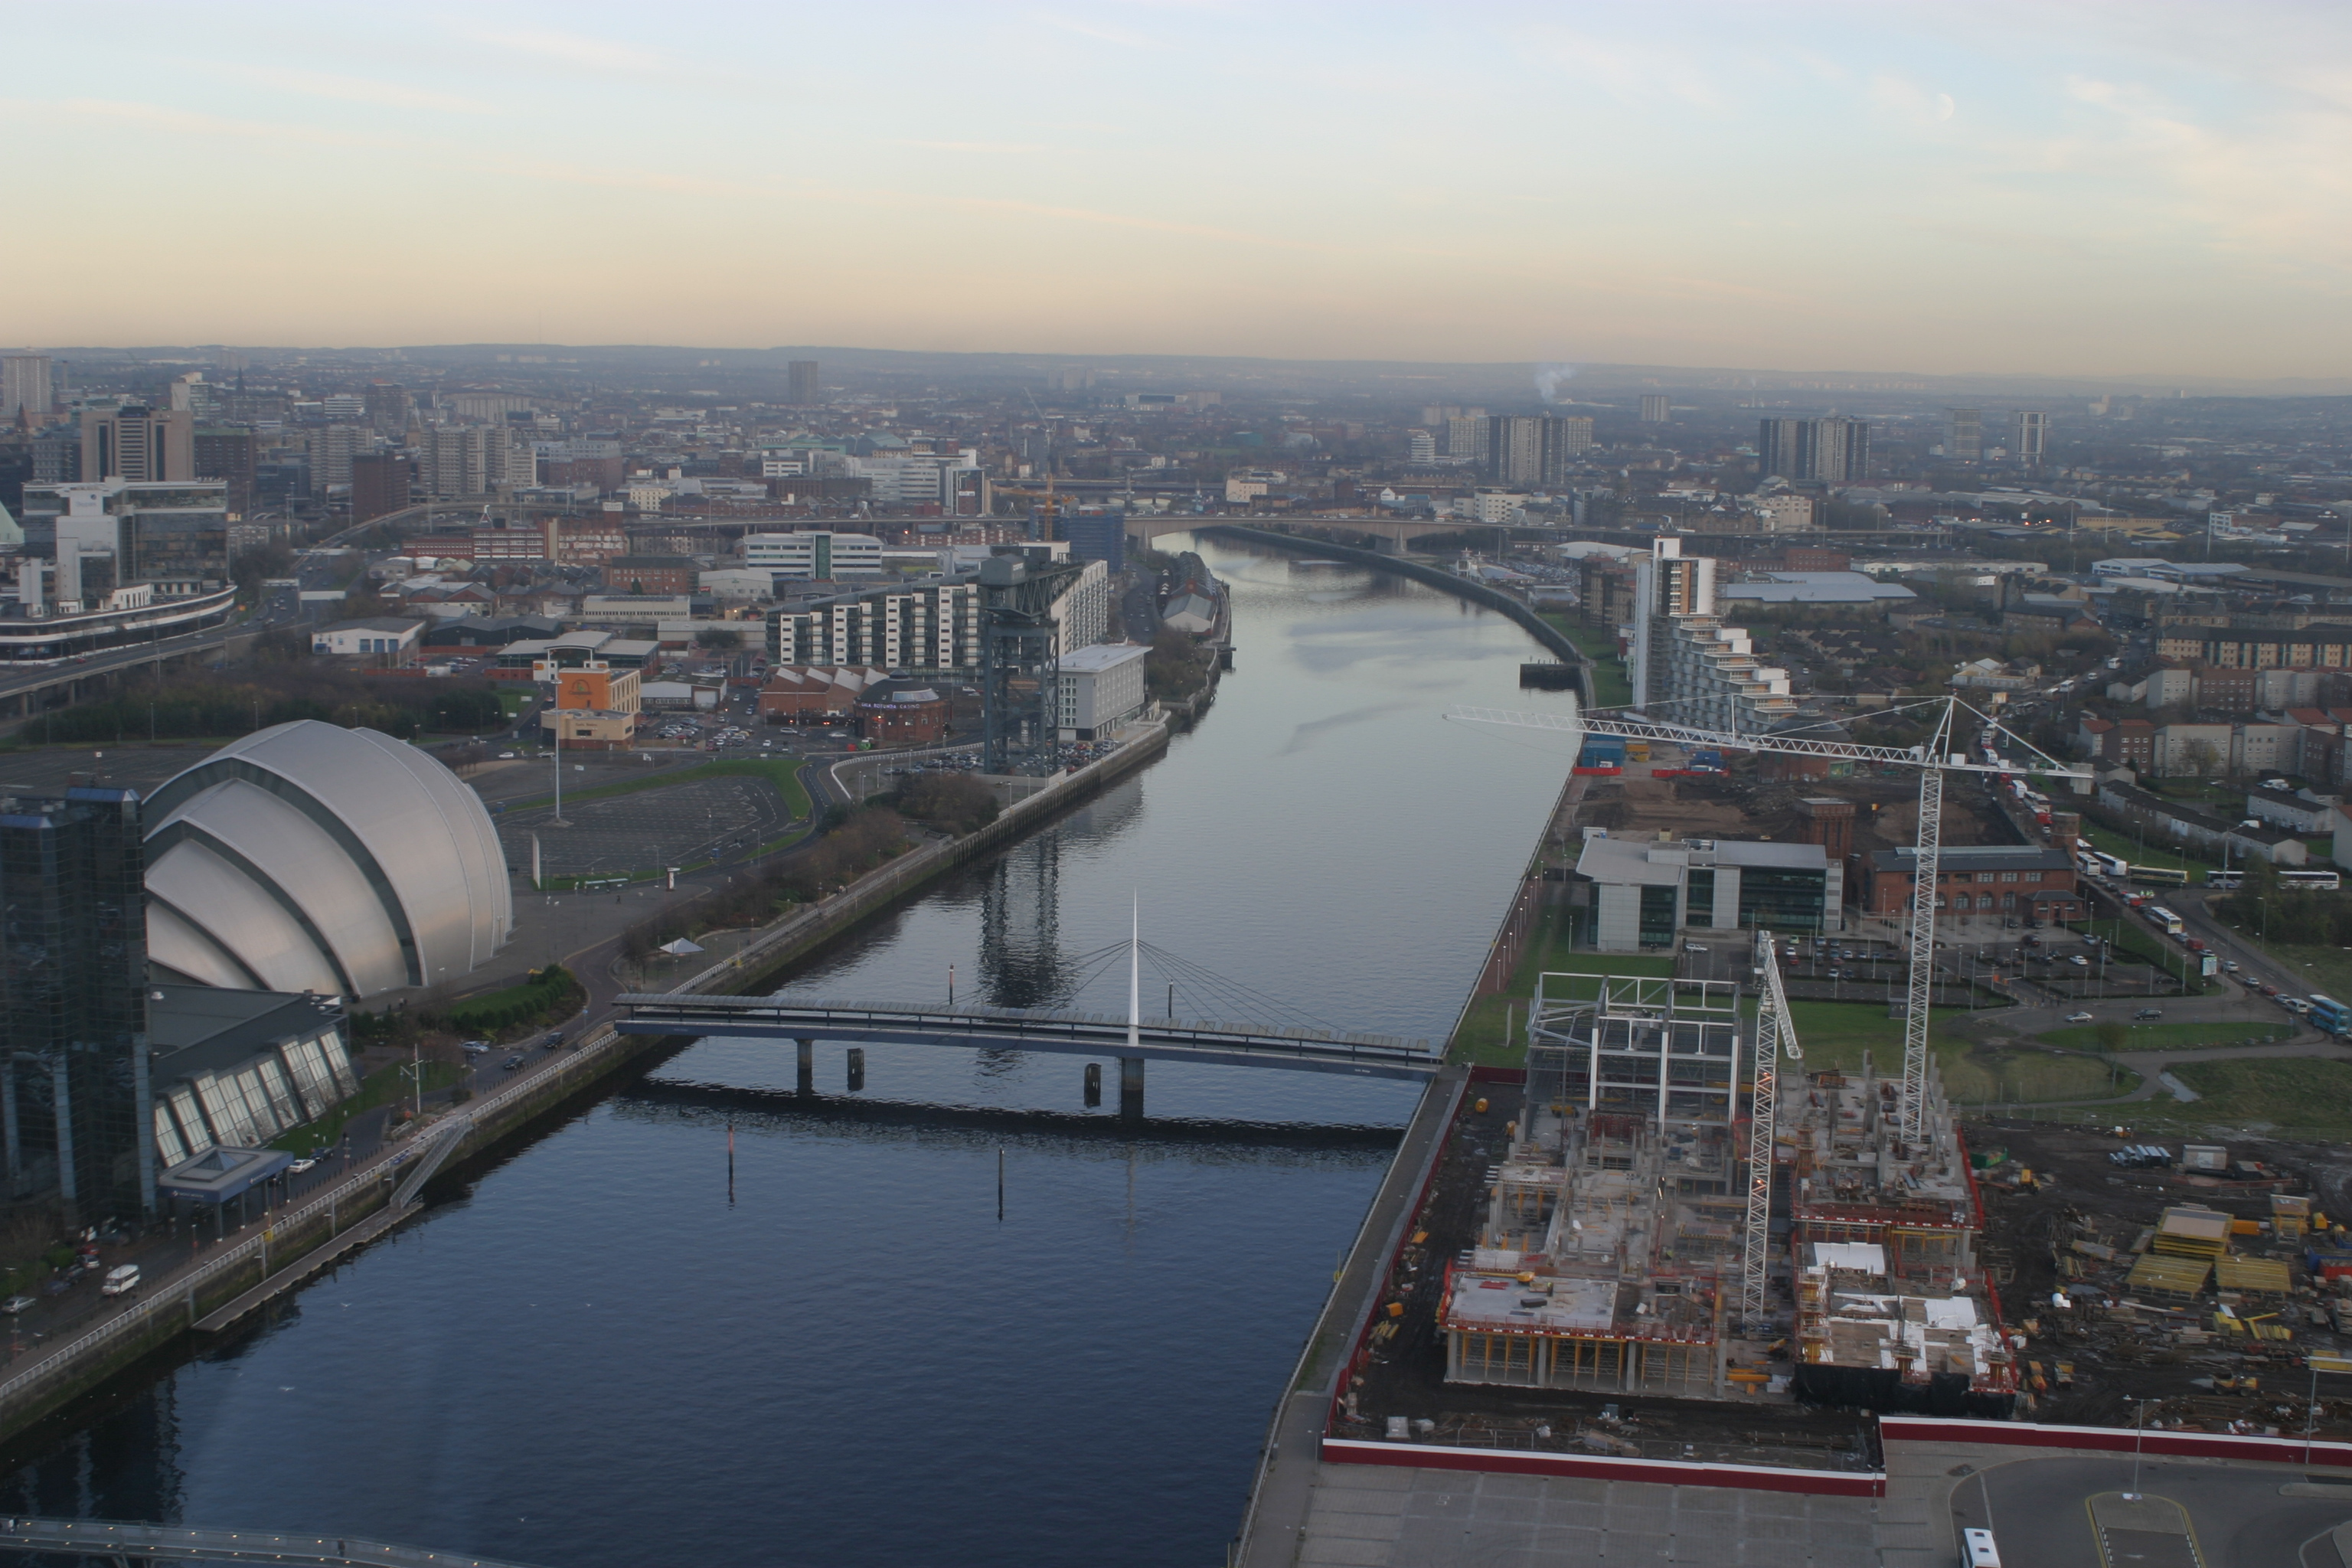 A new whisky distillery will be built on the banks of the River Clyde in Glasgow (iStock)